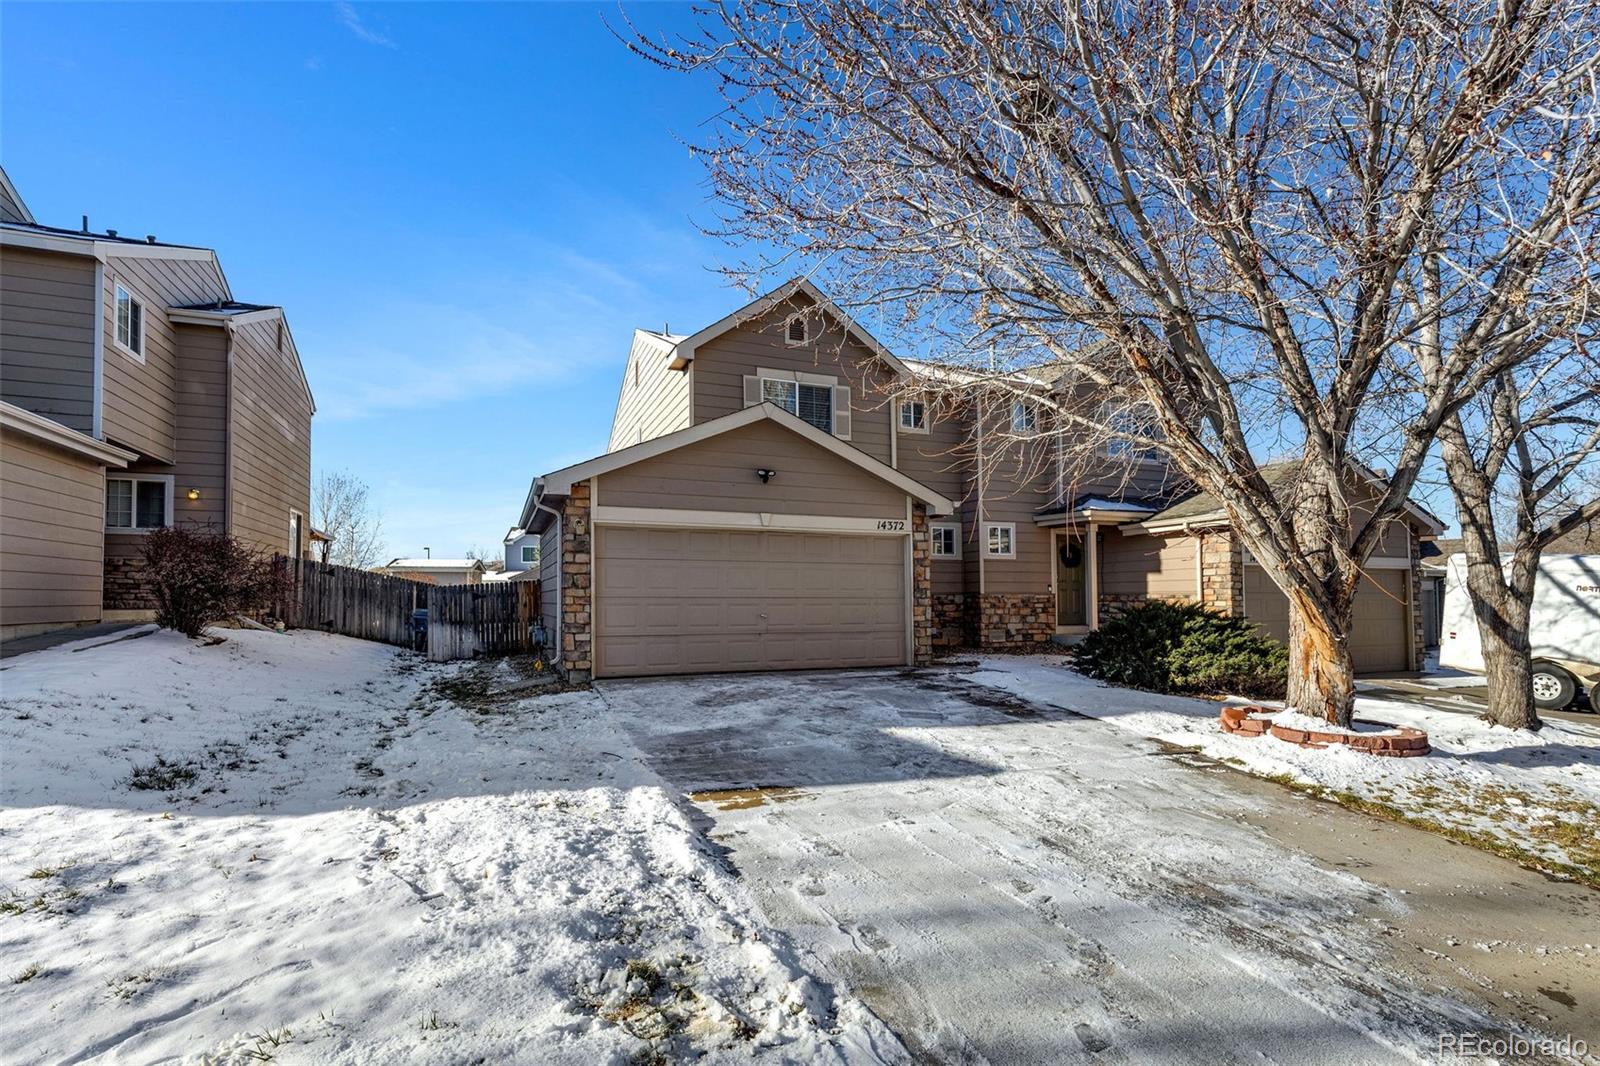 14372 e 47th drive, denver sold home. Closed on 2024-01-31 for $415,000.